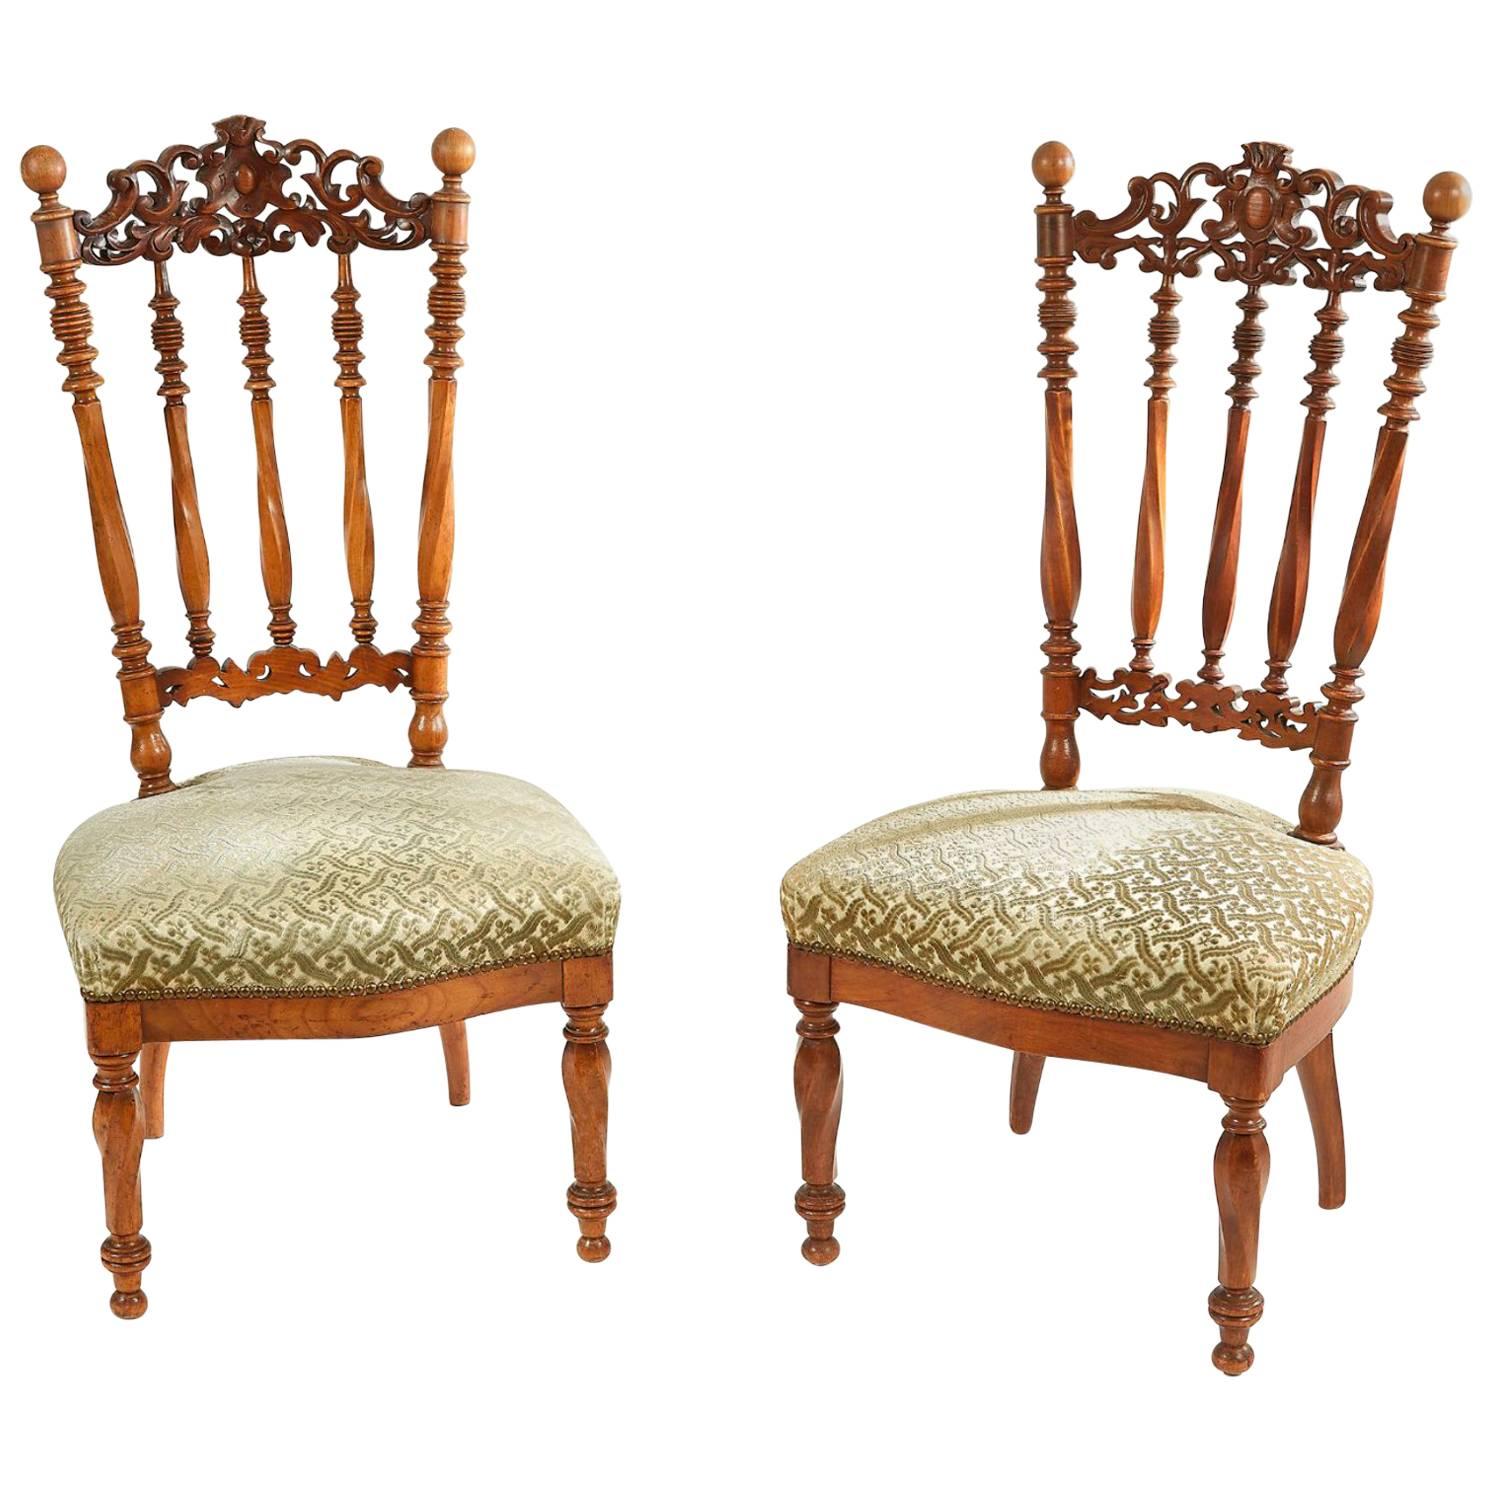 19th Century Pair of French Natural Wood Chairs with Openwork Back